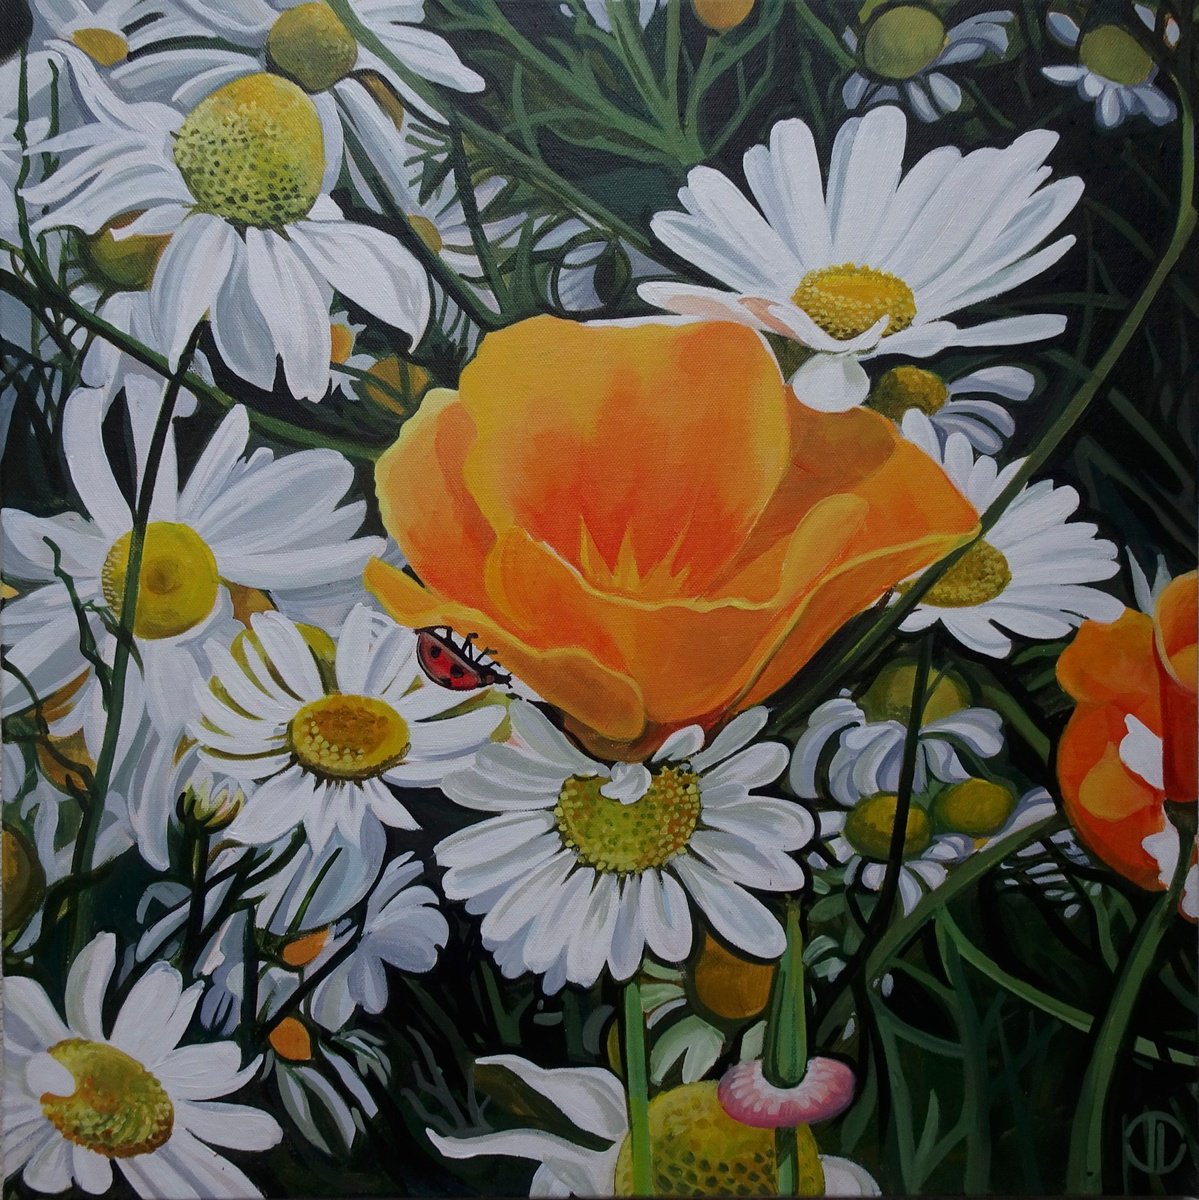 White Daisies And Californian Poppies by Joseph Lynch